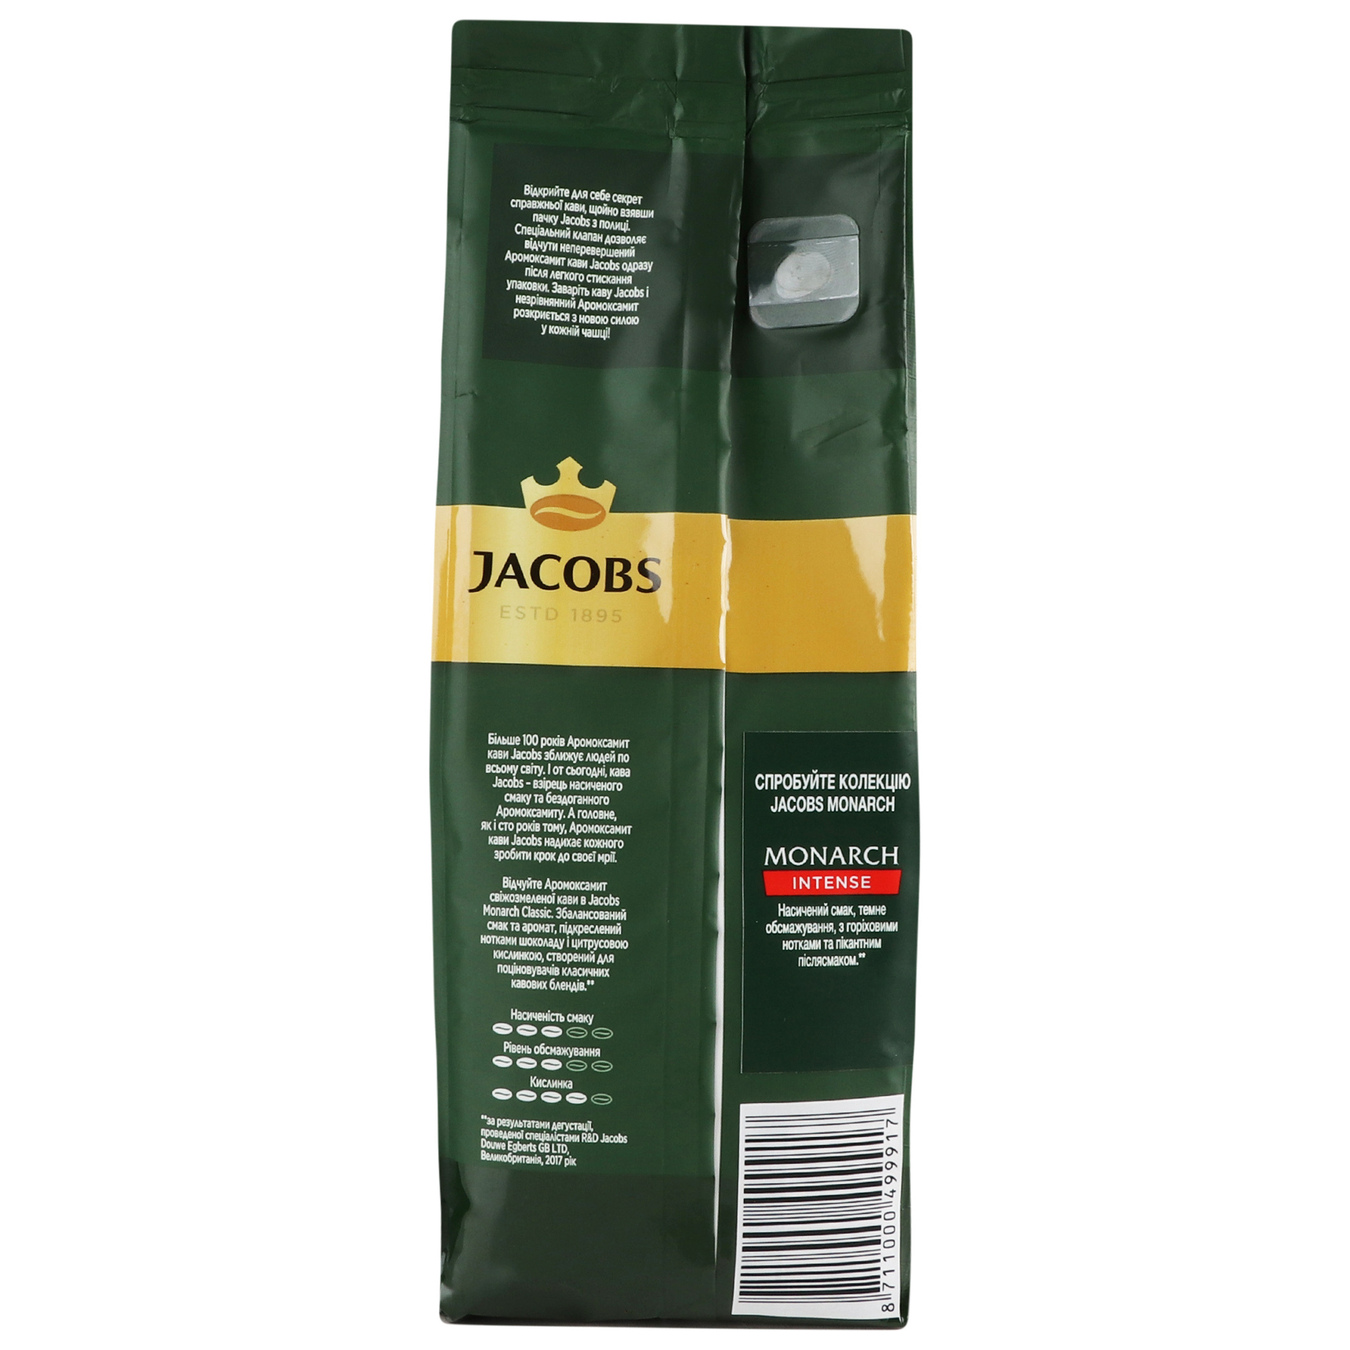 JACOBS MONARCH CLASSIC natural roasted ground coffee 200g 2